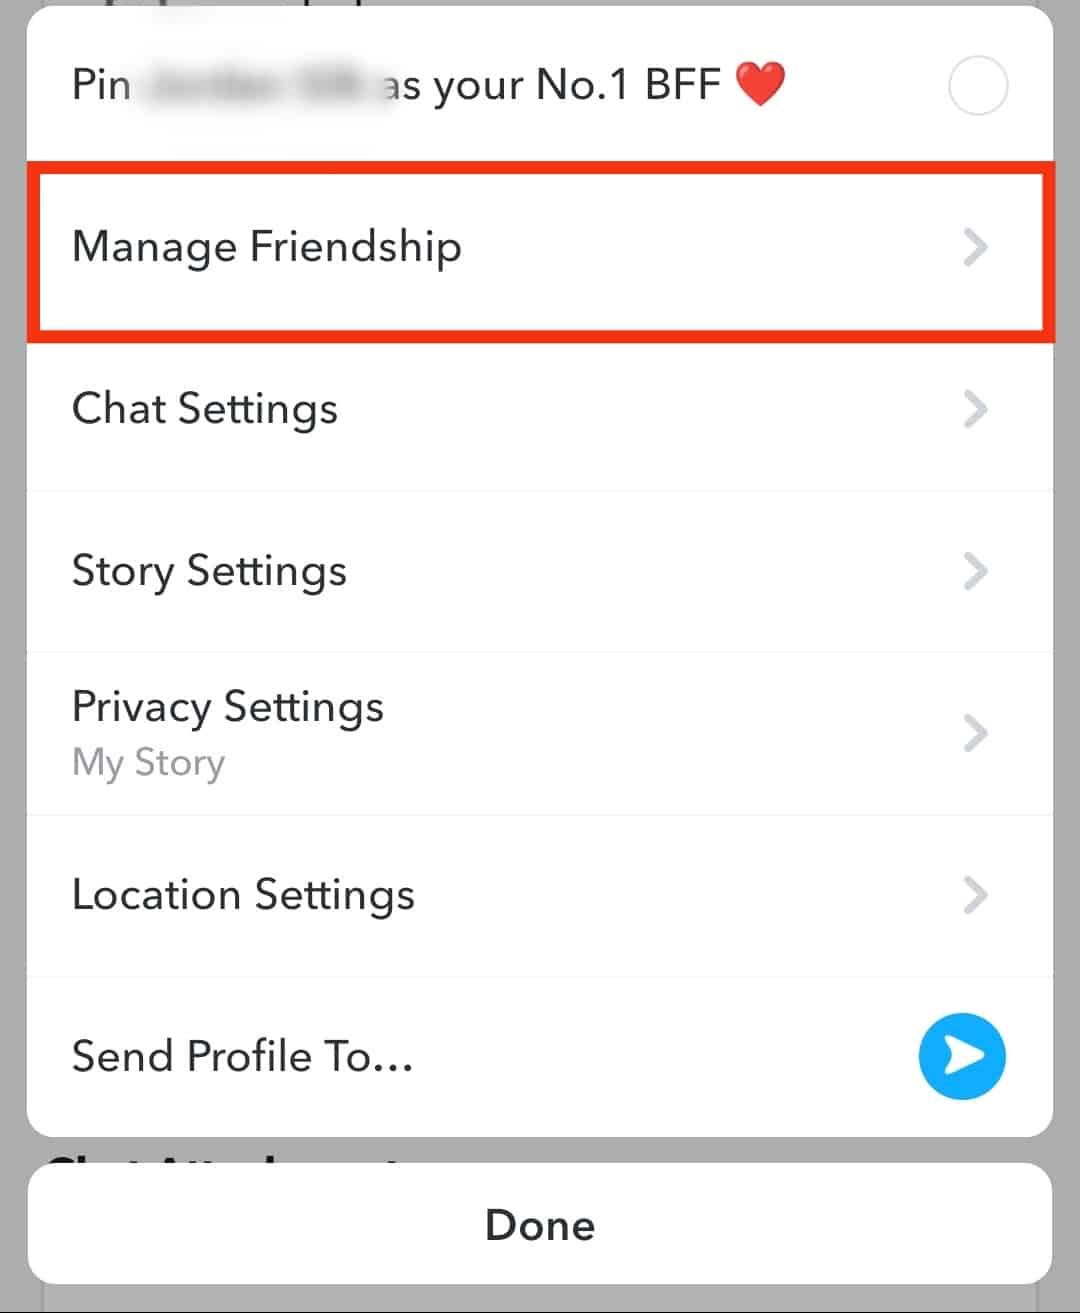 Tap On Manage Friendship